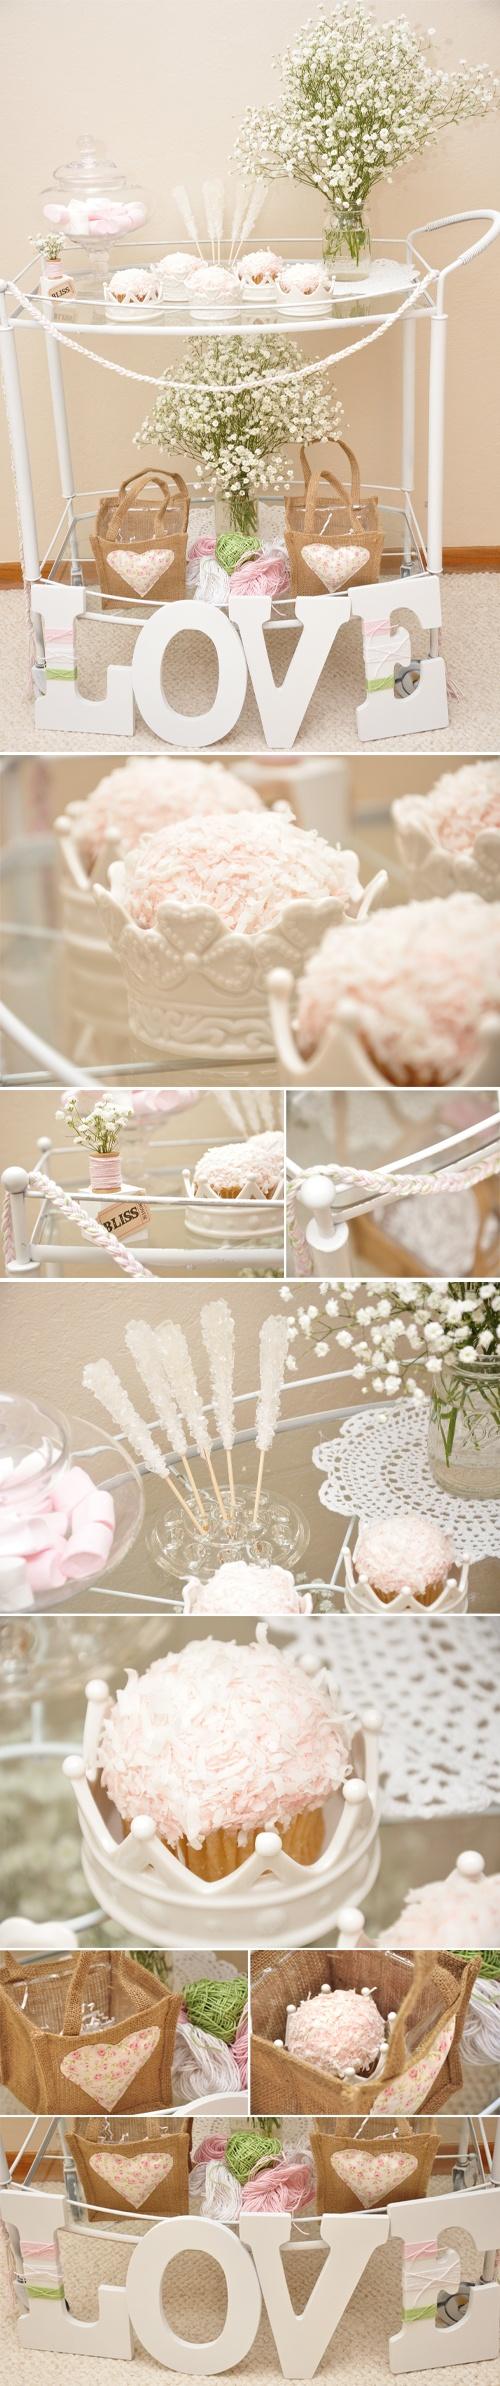 Wedding - Your Ticket To Love - Bridal Shower